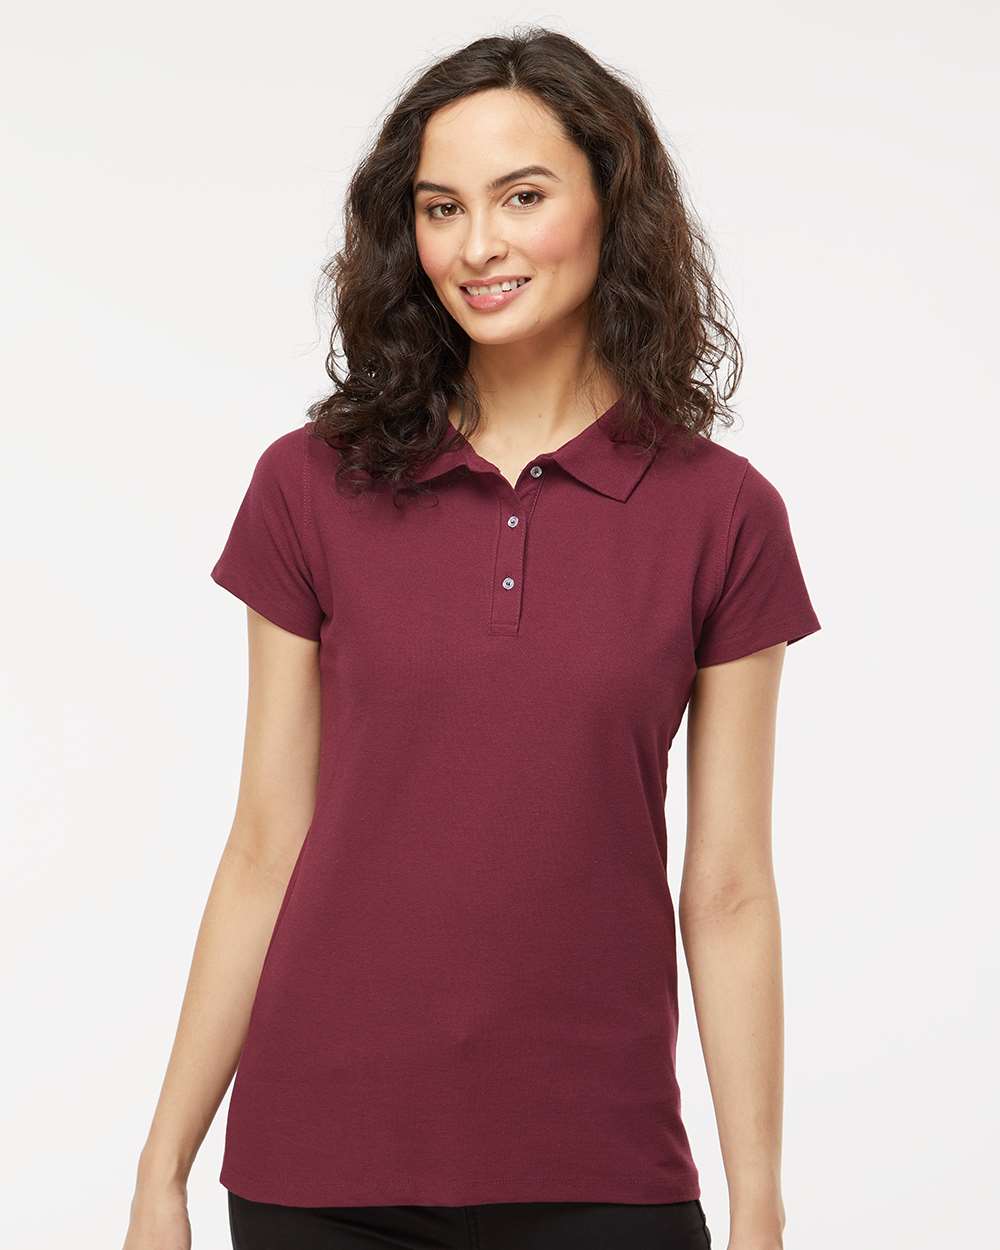 M&O Women’s Soft Touch Polo #7007 Maroon